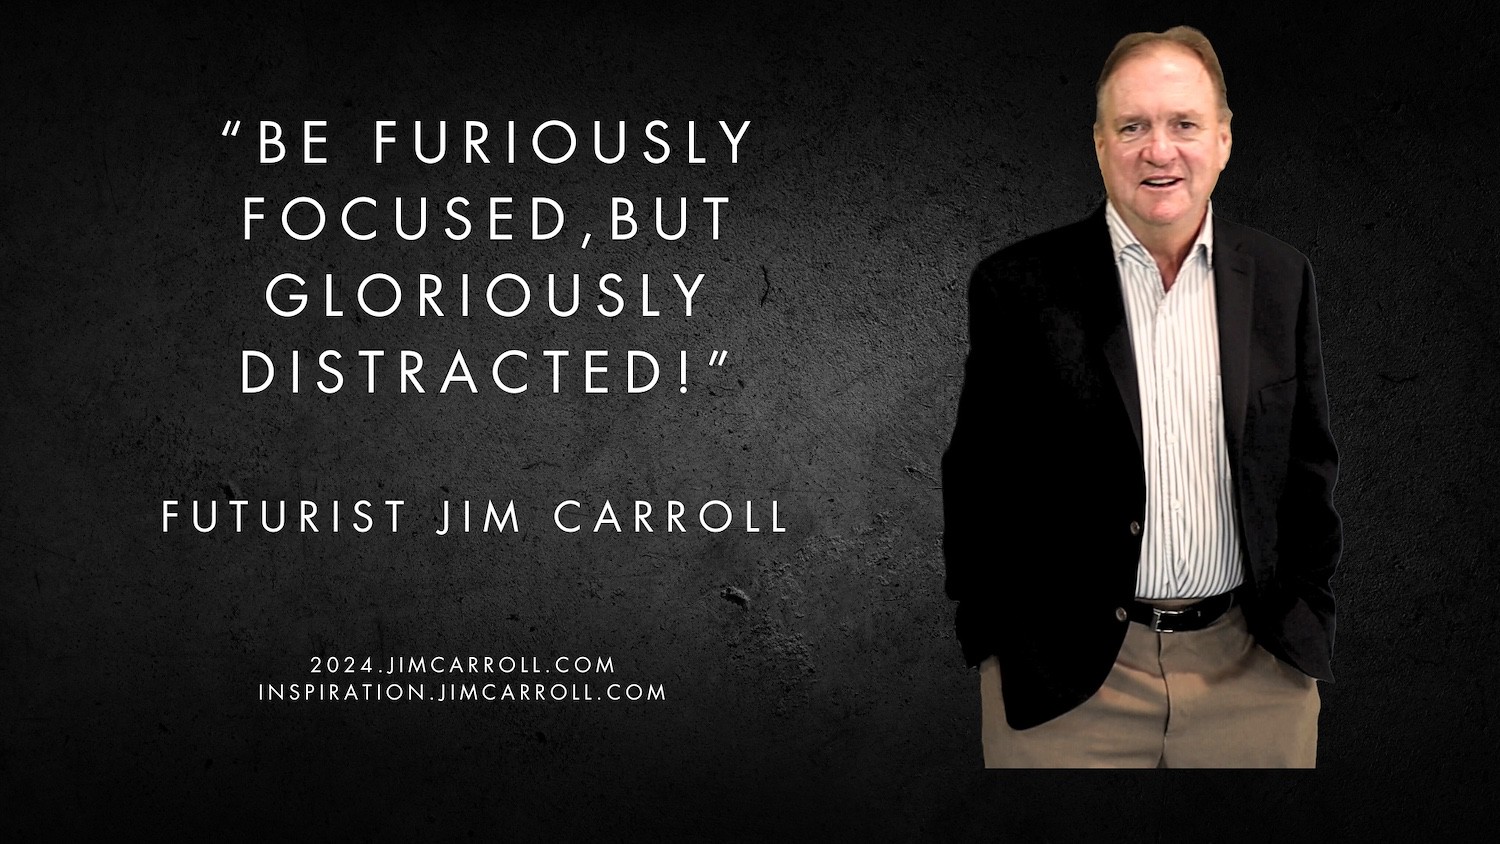 "Be furiously focused, but gloriously distracted!" - Futurist Jim Carroll